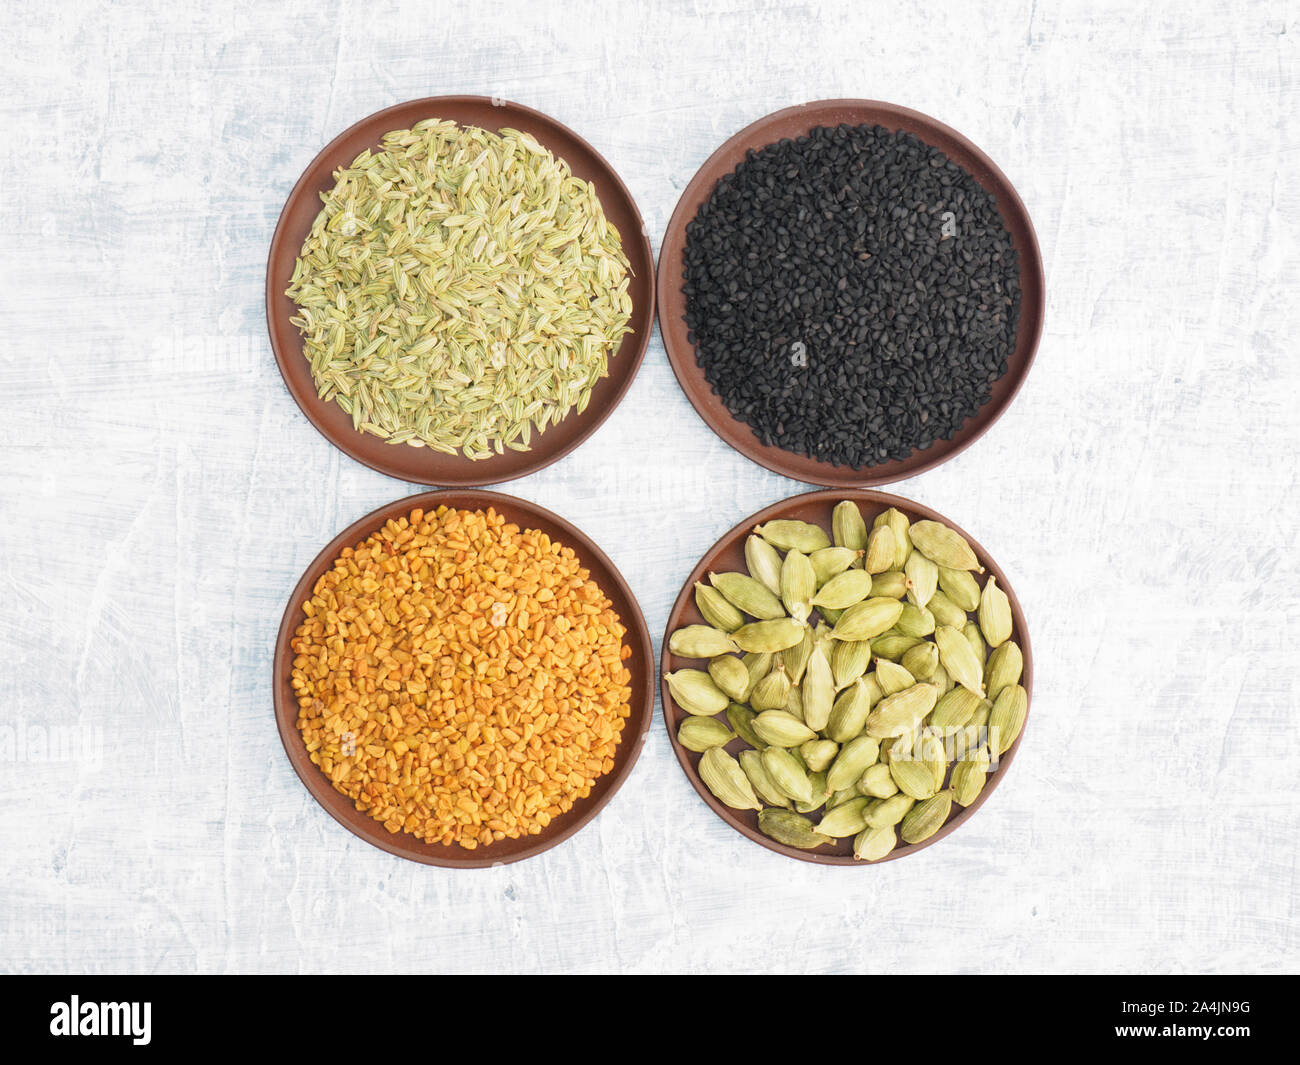 Spices and herbs set on concrete background in clay plate. Black cumin, fenugreek, fennel, green cardamom. Modern apothecary, naturopathy and ayurveda Stock Photo